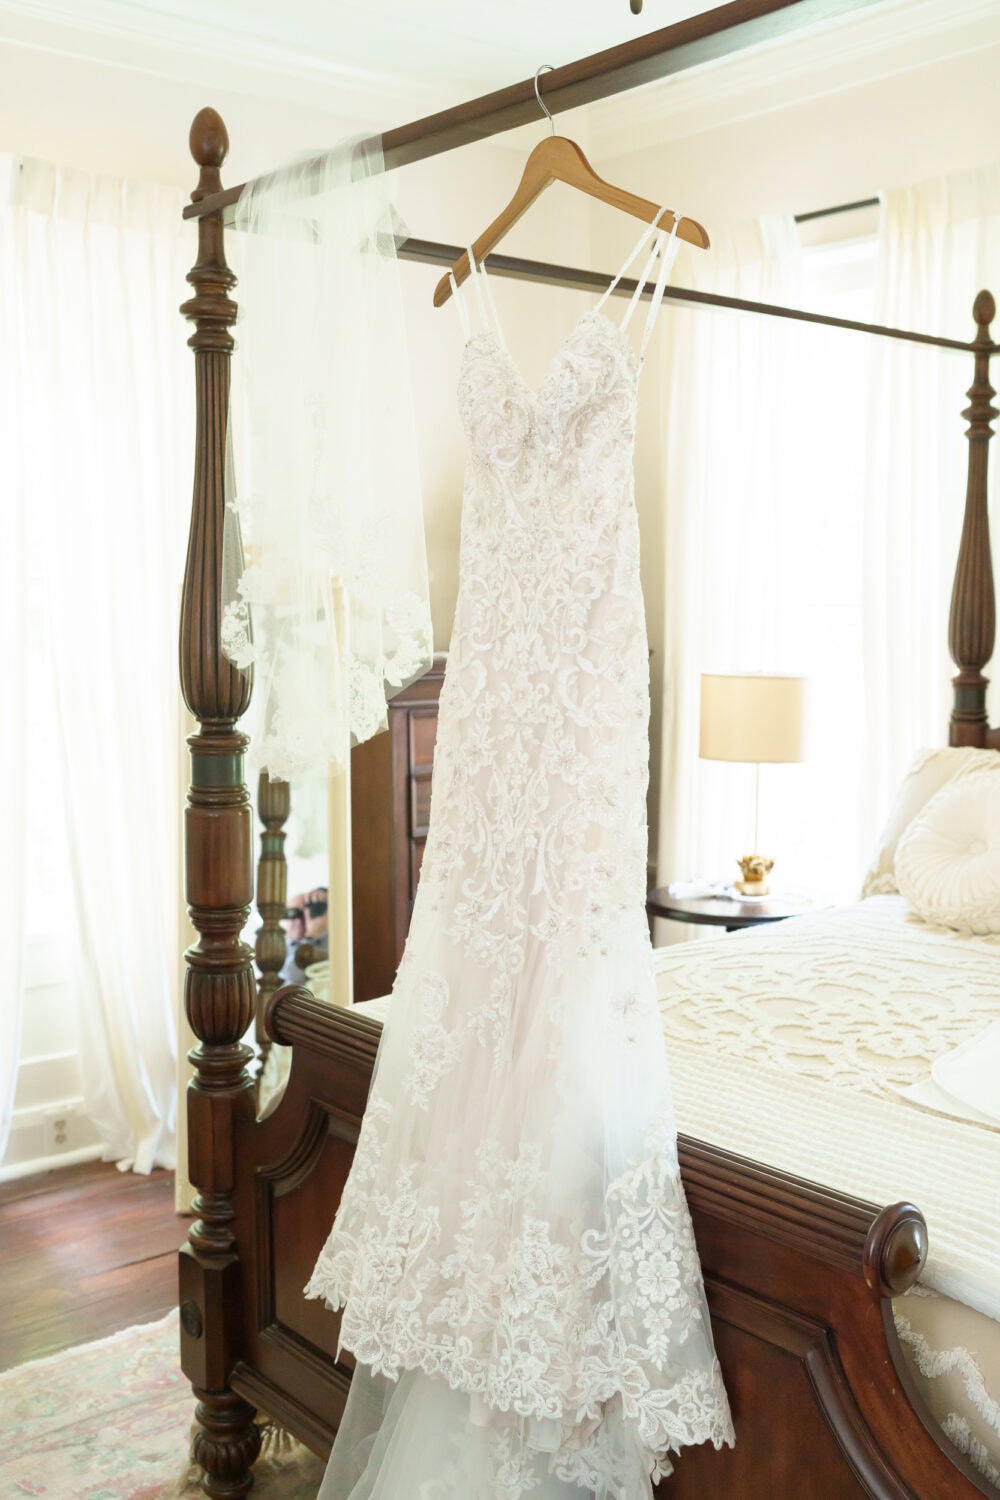 Wedding dress hanging hanging from the bed - Tanglewood Plantation